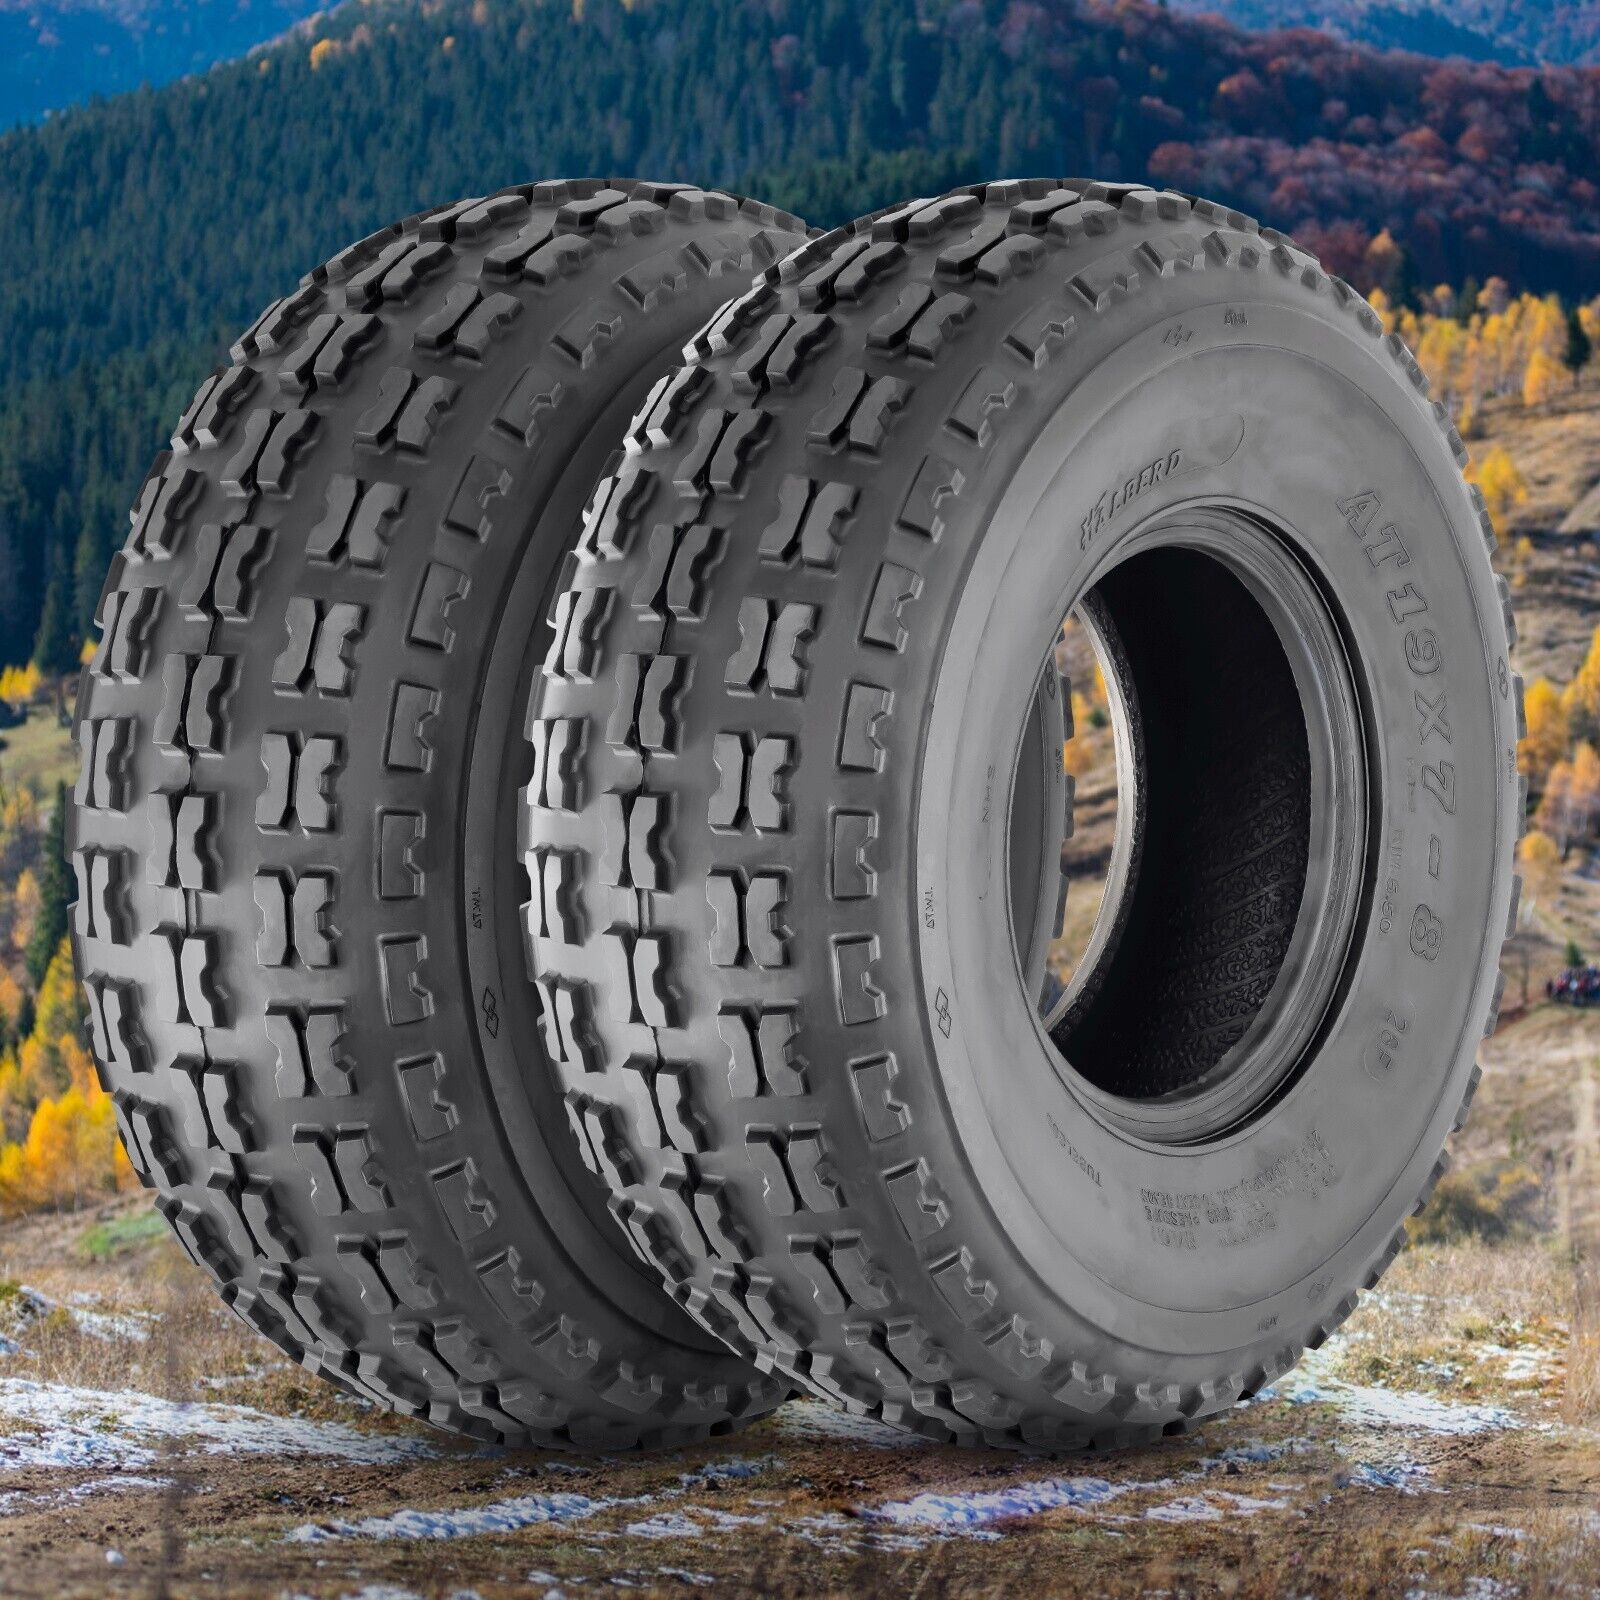 Upgrade Set Of 2 19x7-8 ATV Tires 4PR Heavy Duty 19x7x8 Tubeless Replacement